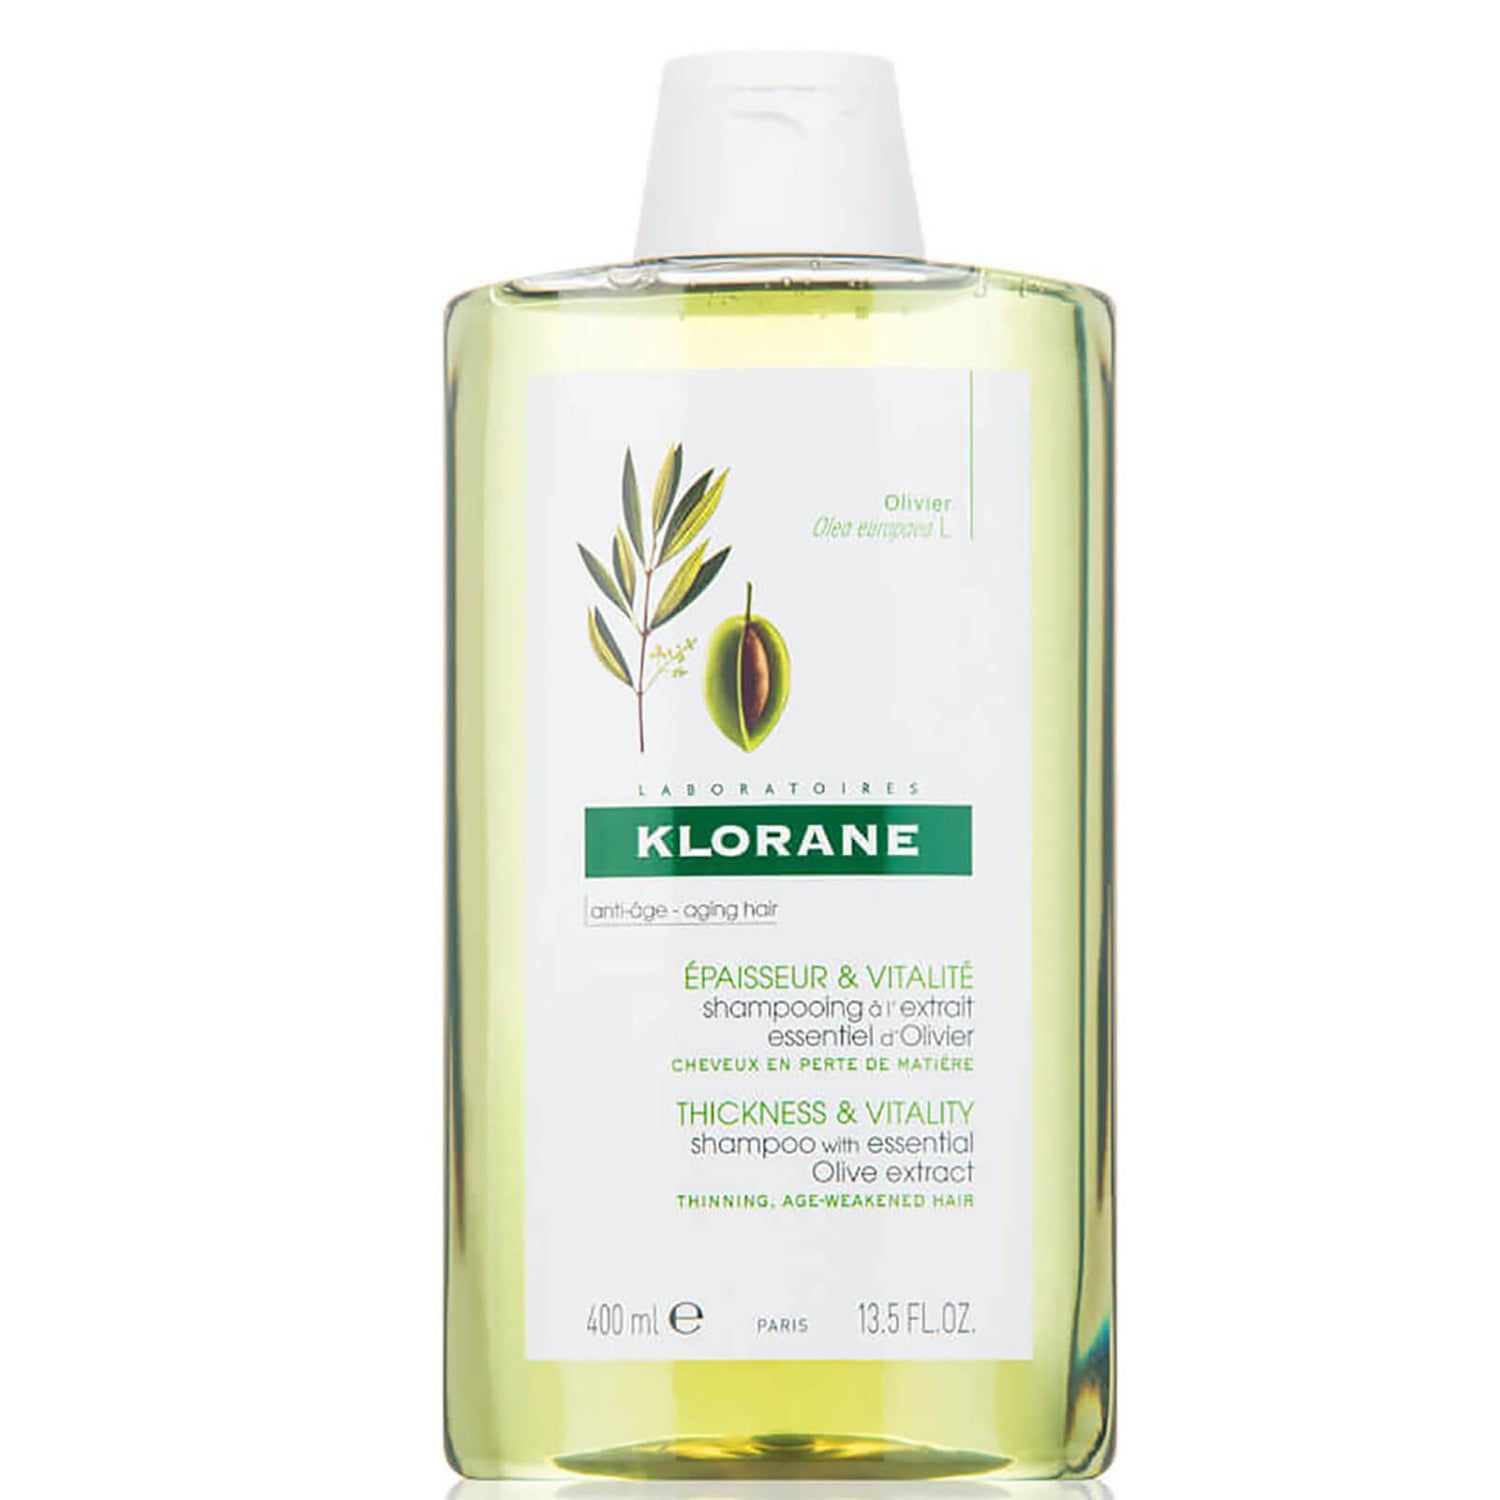 KLORANE Shampoo with Essential Olive Extract 13.5oz